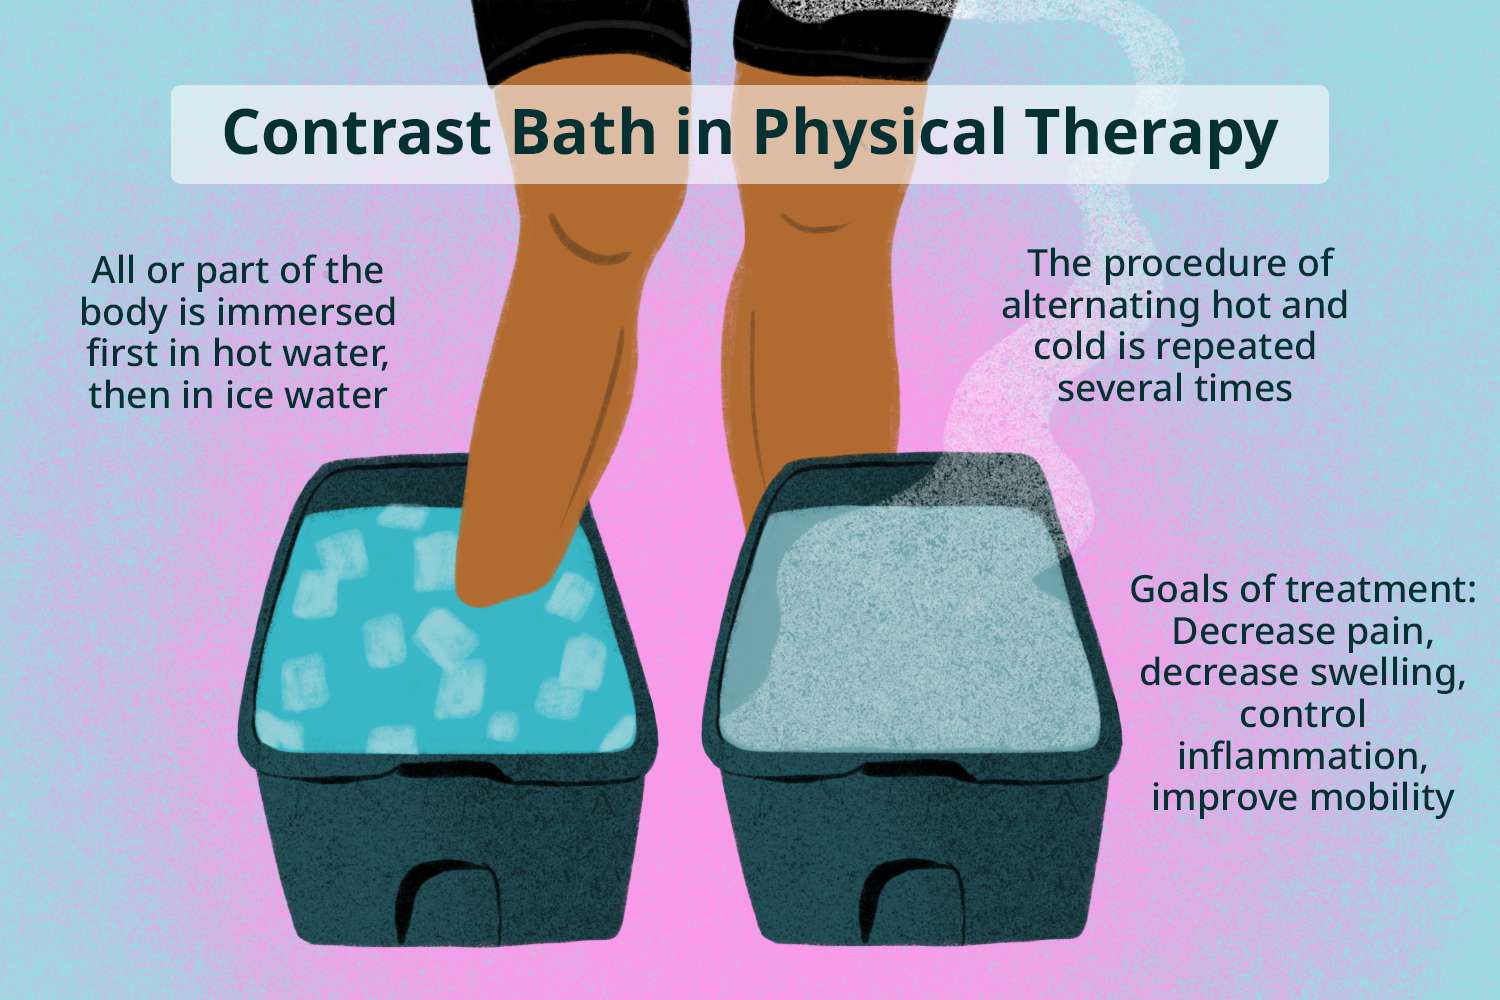 CONTRAST HYDRO THERAPY